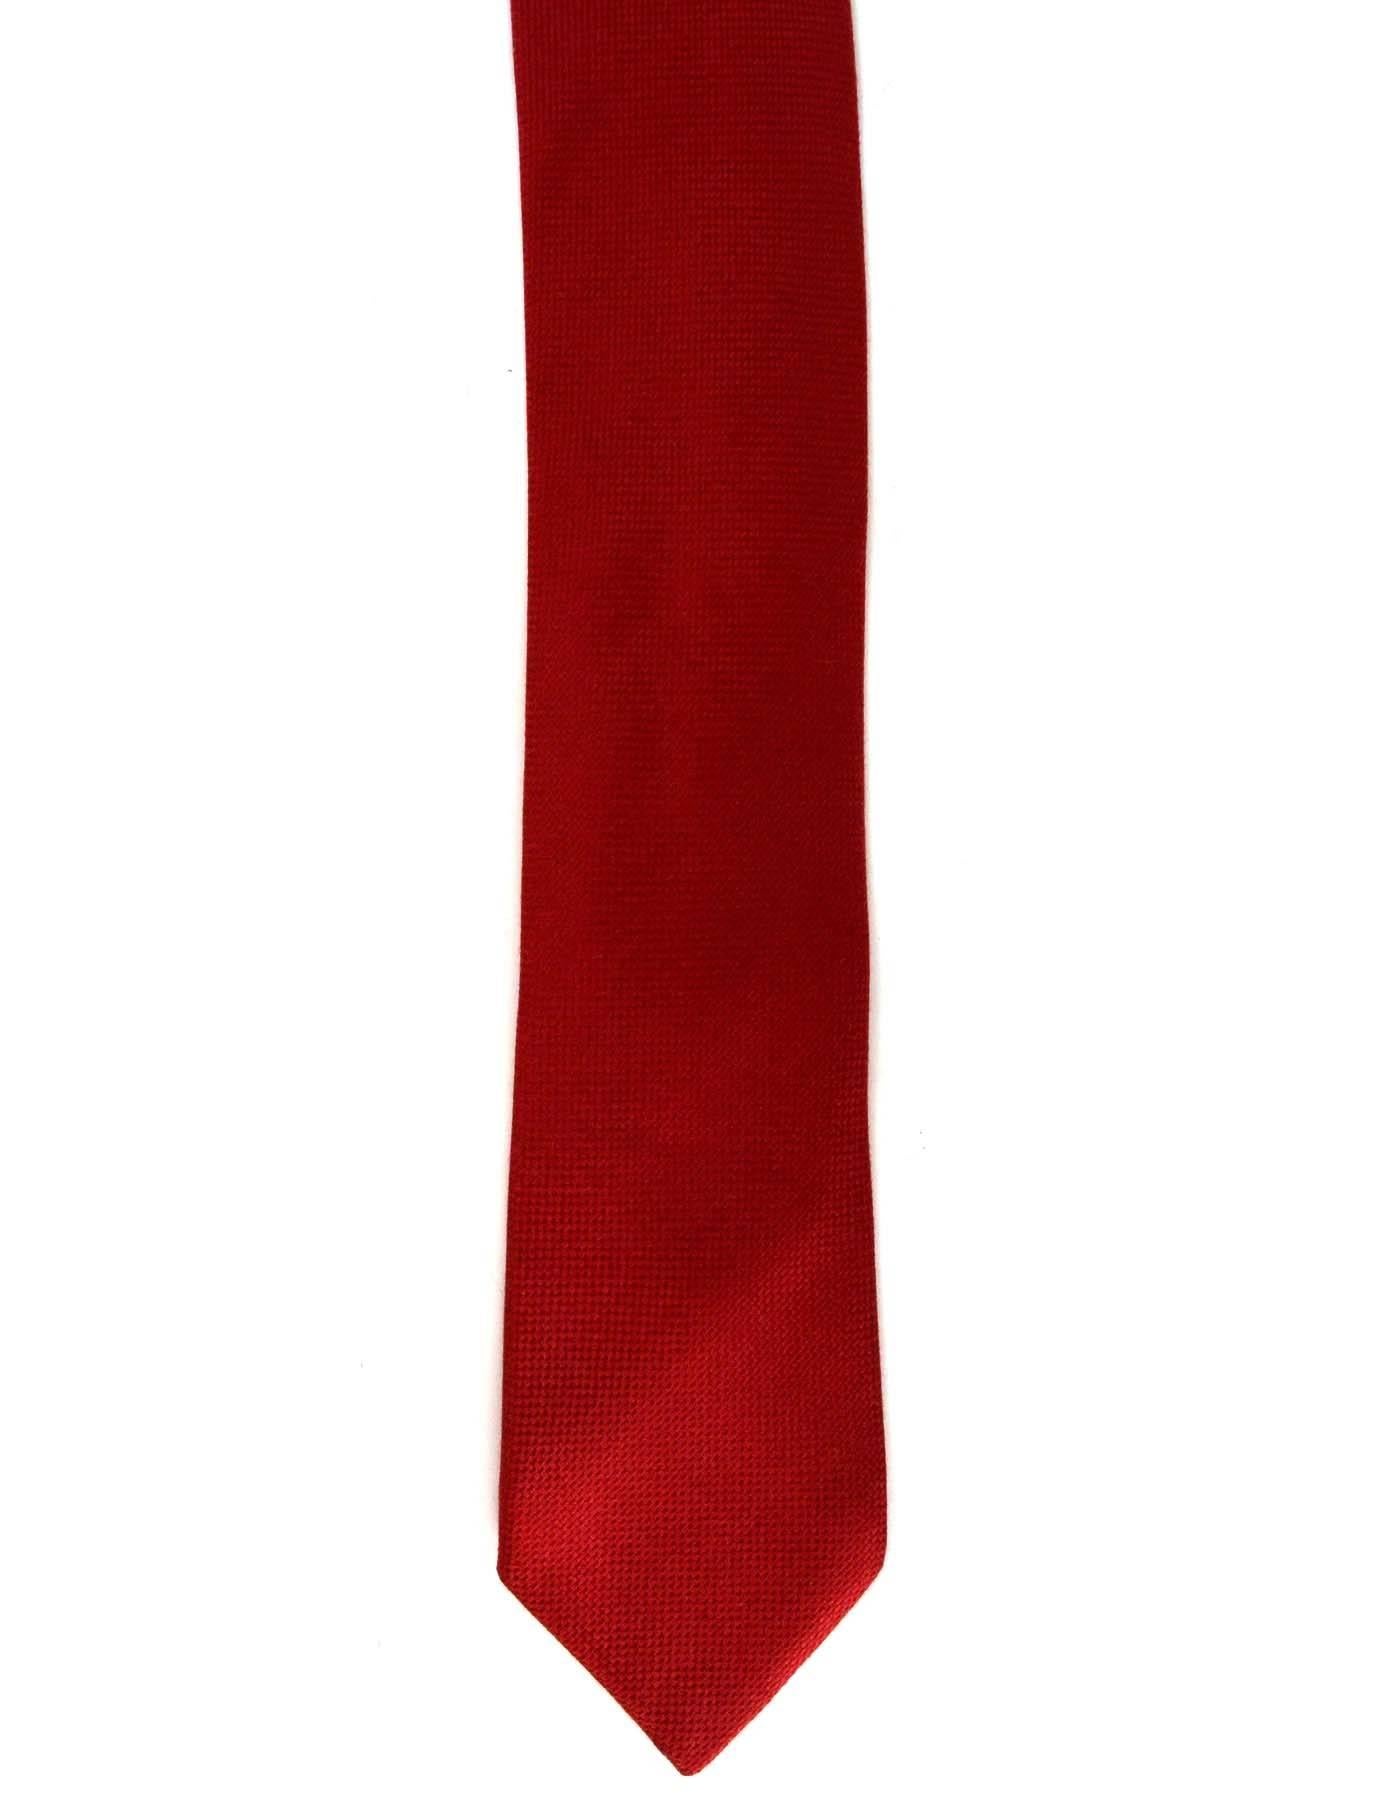 Hermes Red Woven Silk Square Tie
Made In: France
Color: Red
Composition: 100% silk
Overall Condition: Excellent pre-owned condition
Measurements: 
Length:59.5